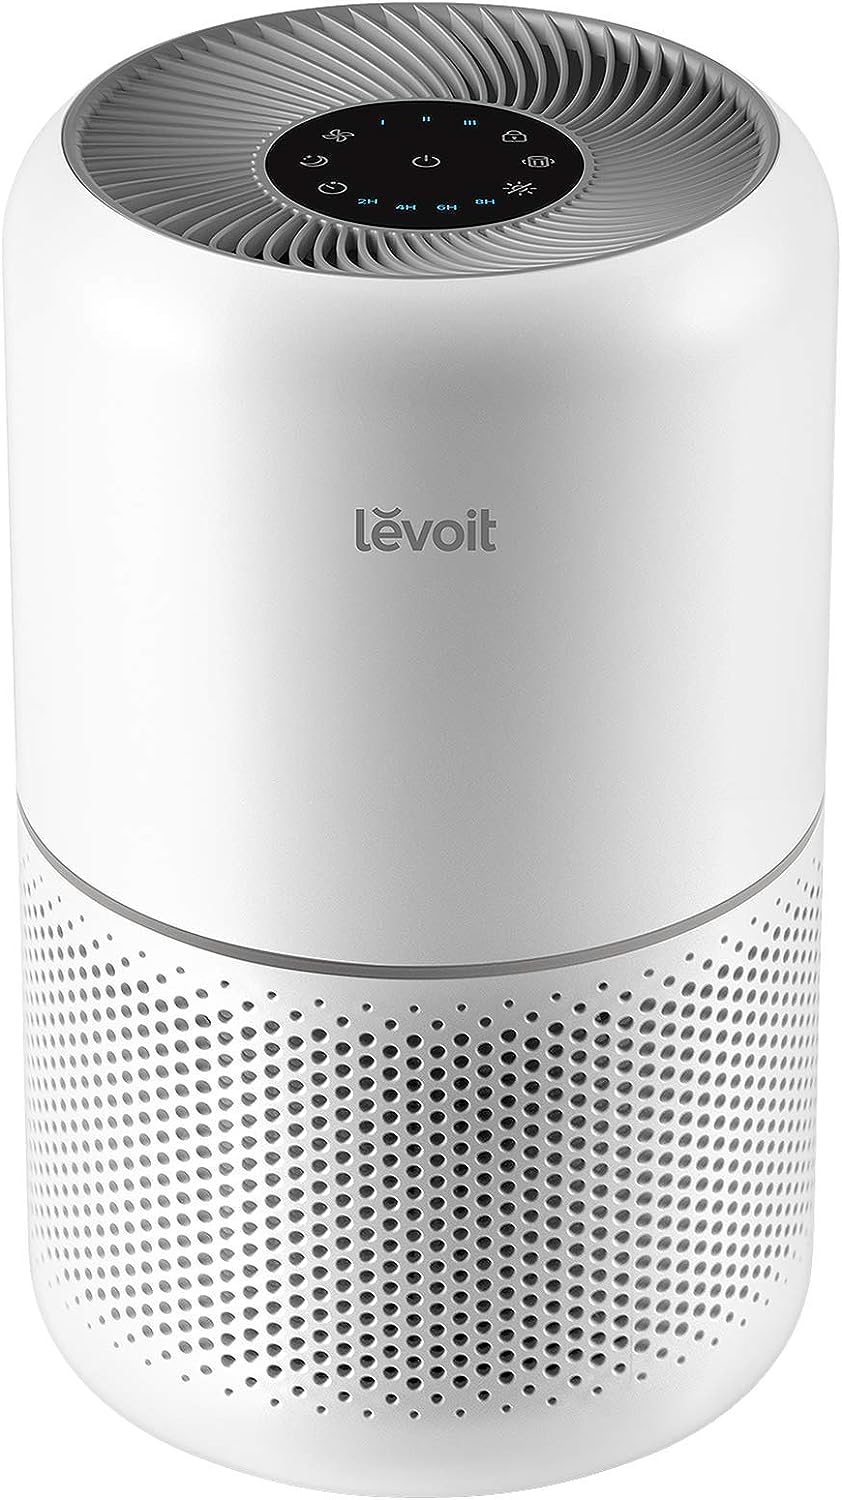 LEVOIT Air Purifier for Home Allergies Pets Hair in Bedroom, Covers Up to 1095 Sq.Foot Powered by 45W High Torque Motor, 3-in-1 Filter, Remove Dust Smoke Pollutants Odor, Core 300 / Core300-P, White